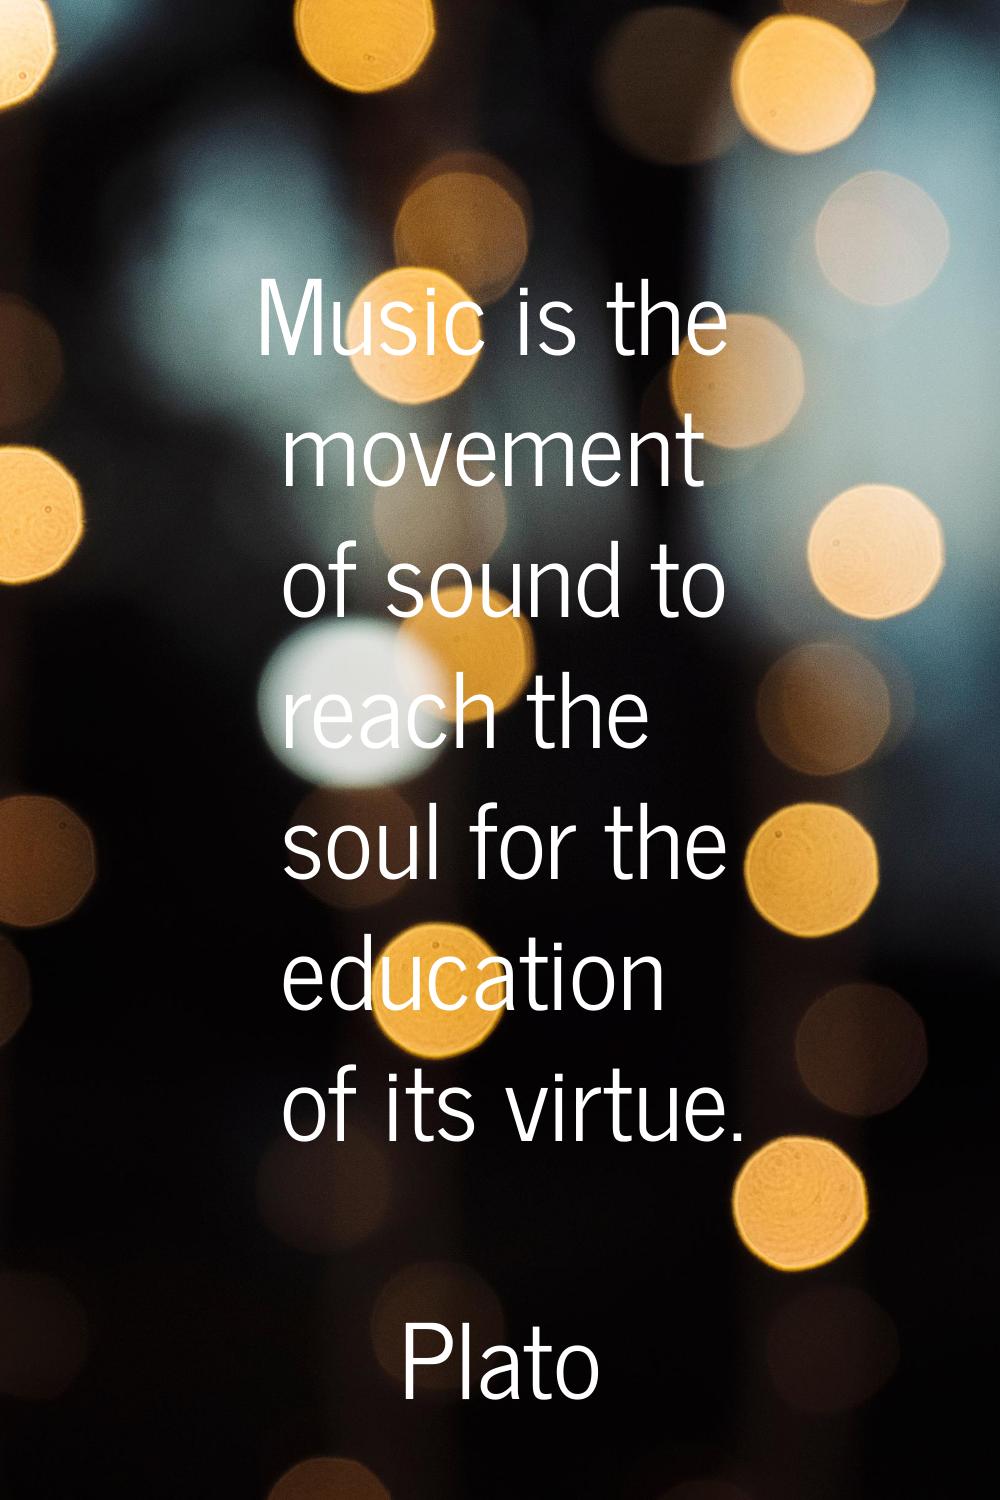 Music is the movement of sound to reach the soul for the education of its virtue.